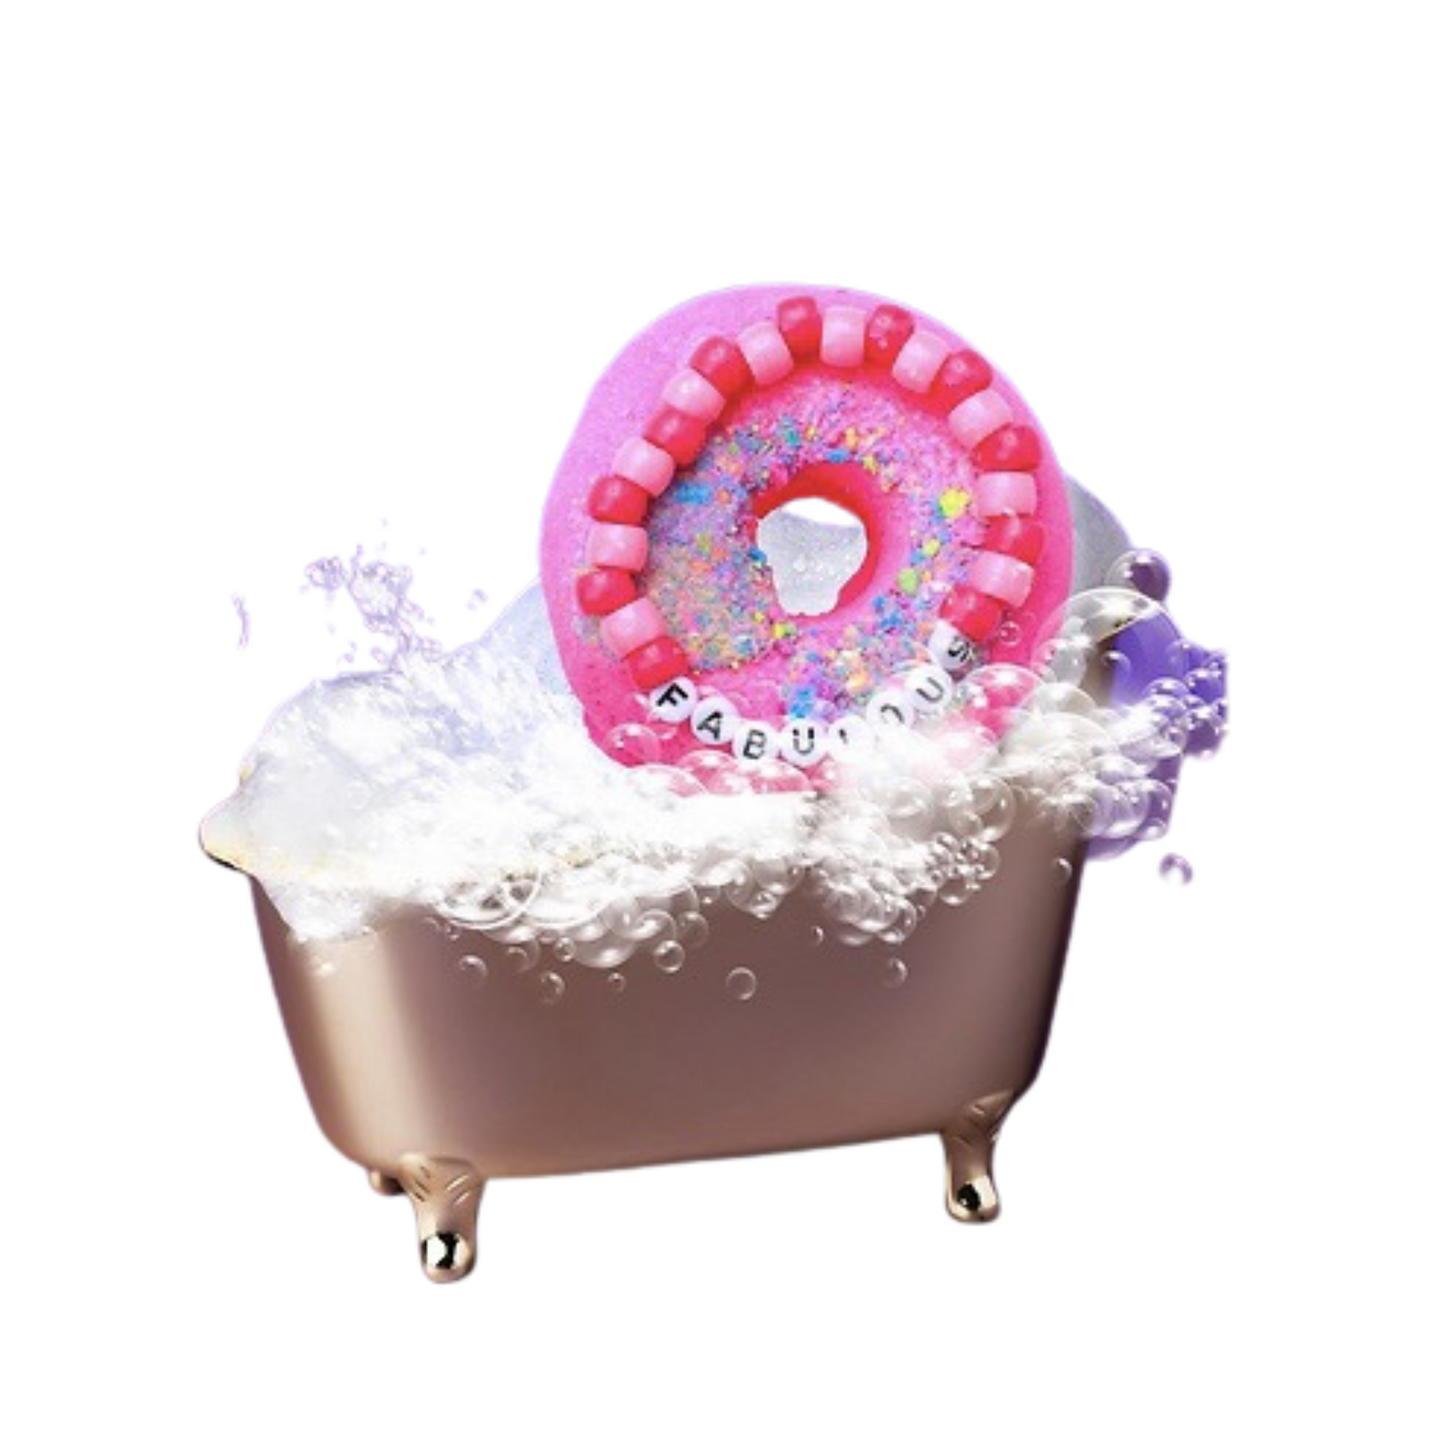 Donut Bath Bomb and bracelet combo in pink